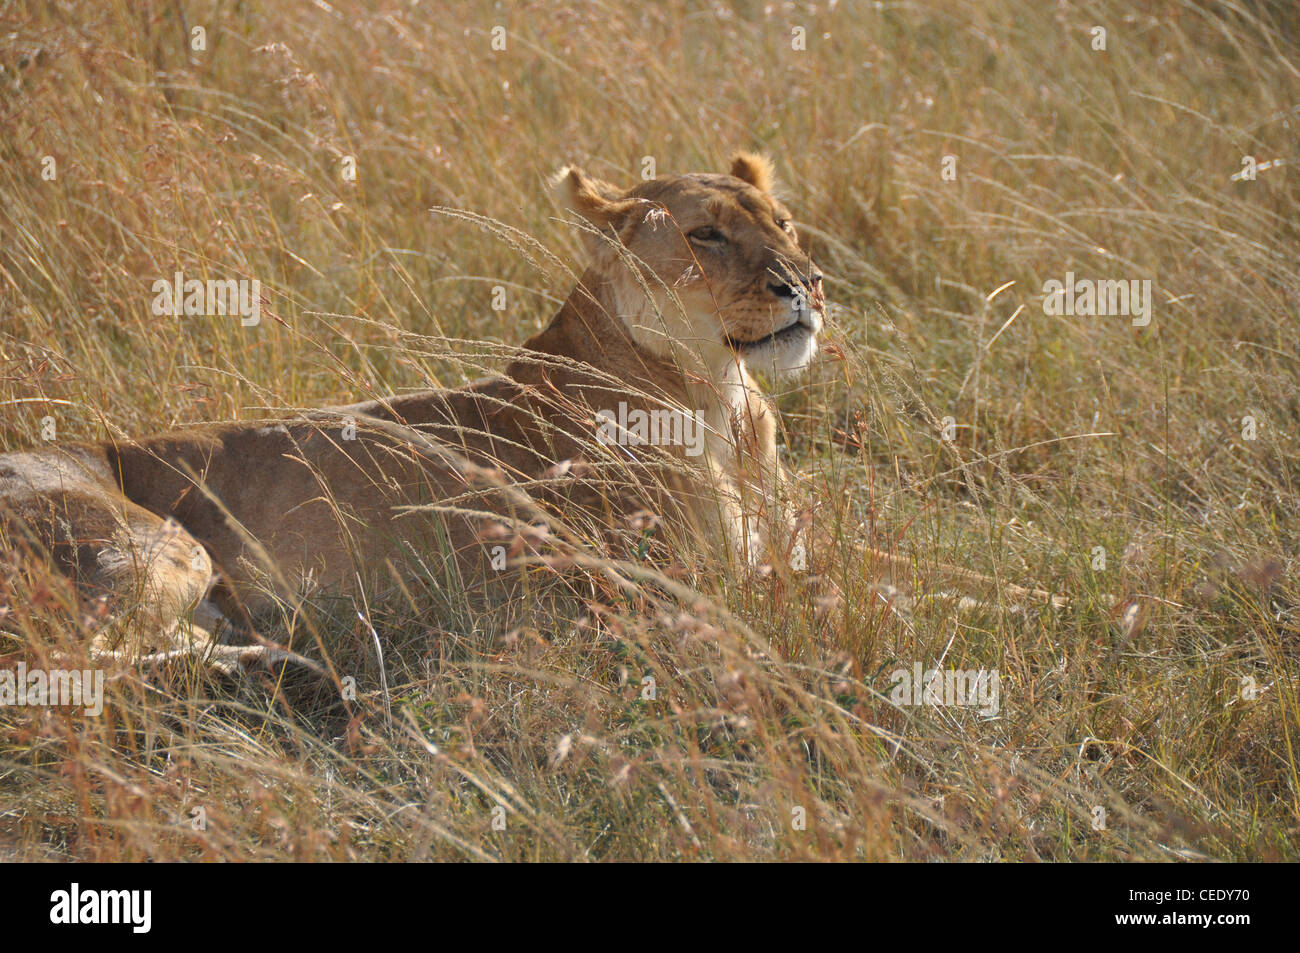 Resting lioness in the Savanna Stock Photo